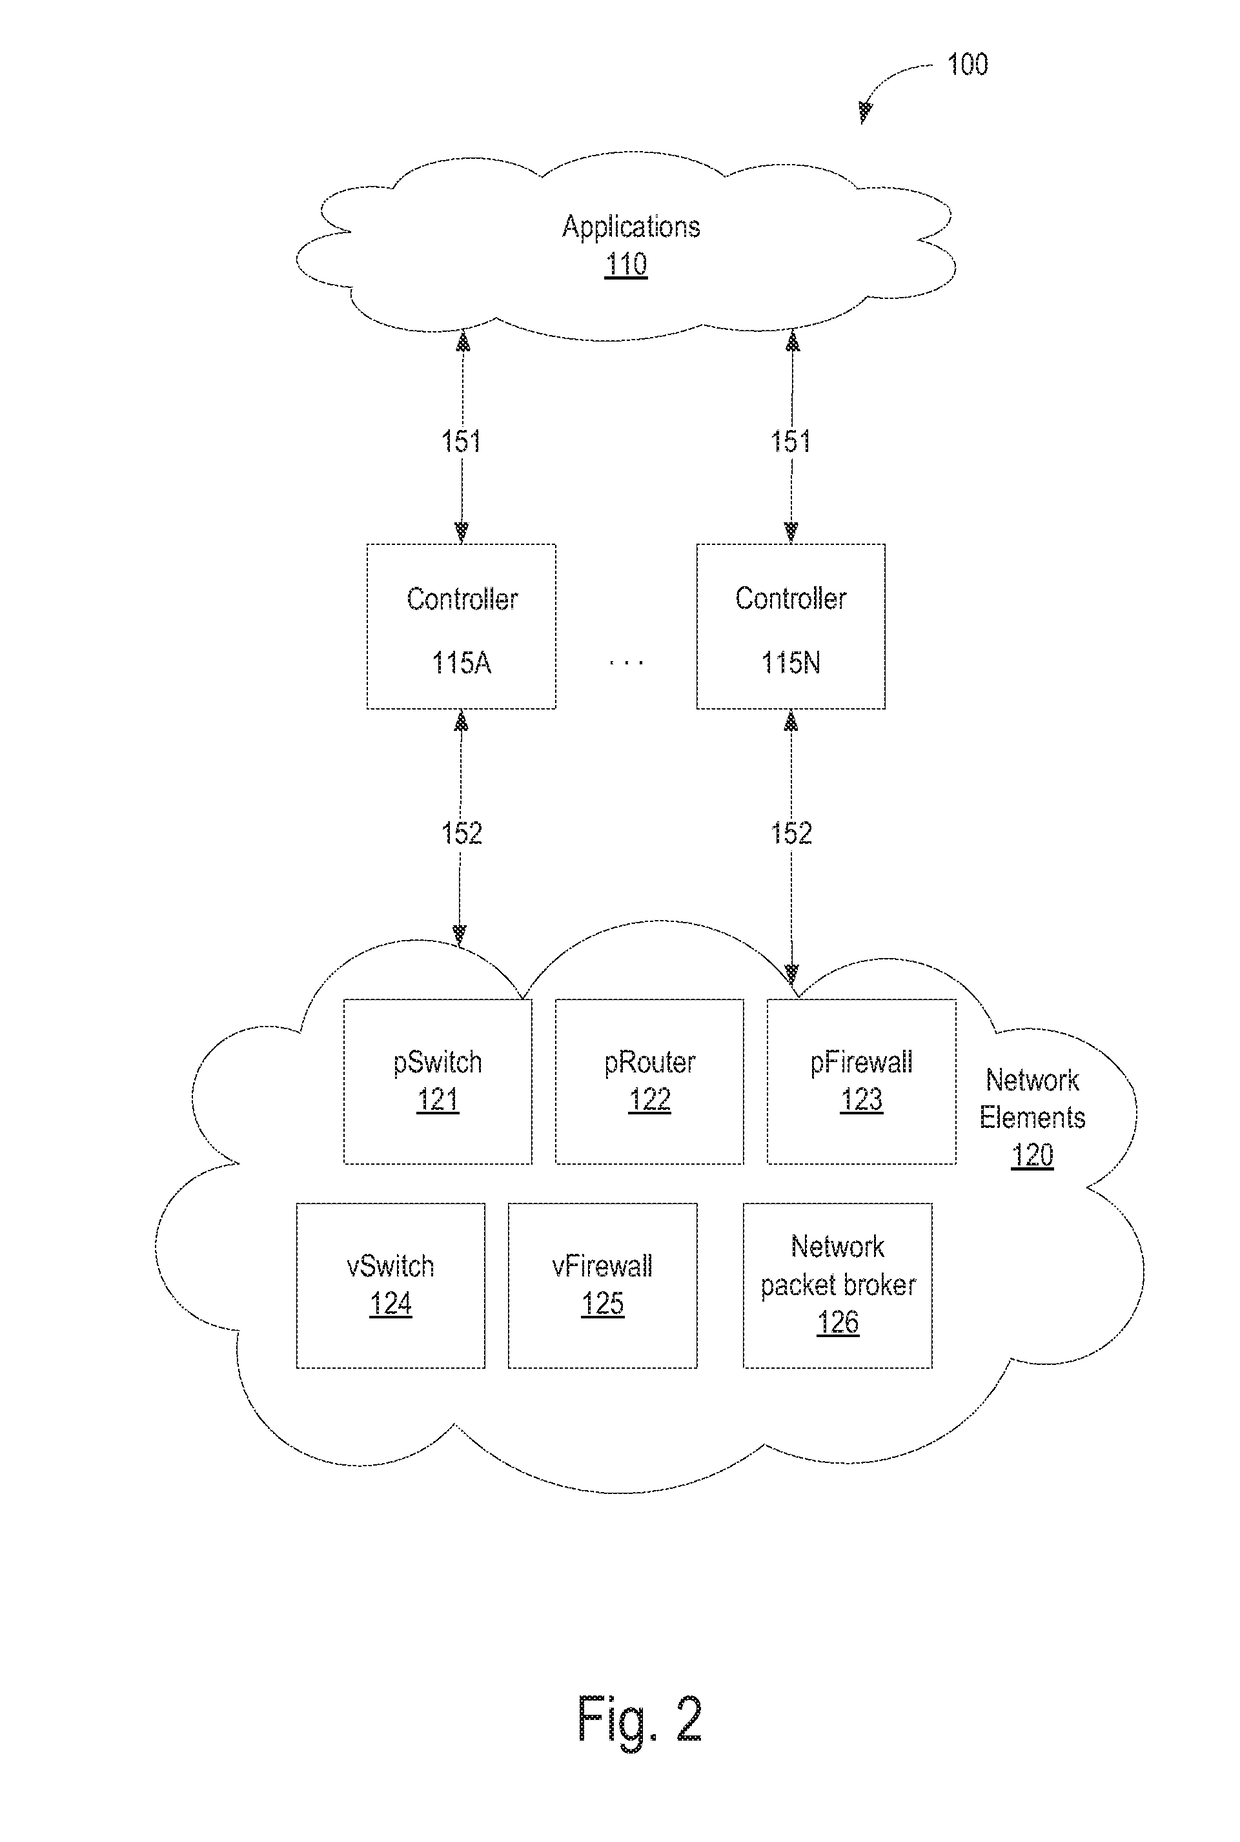 System and method for using real-time packet data to detect and manage network issues